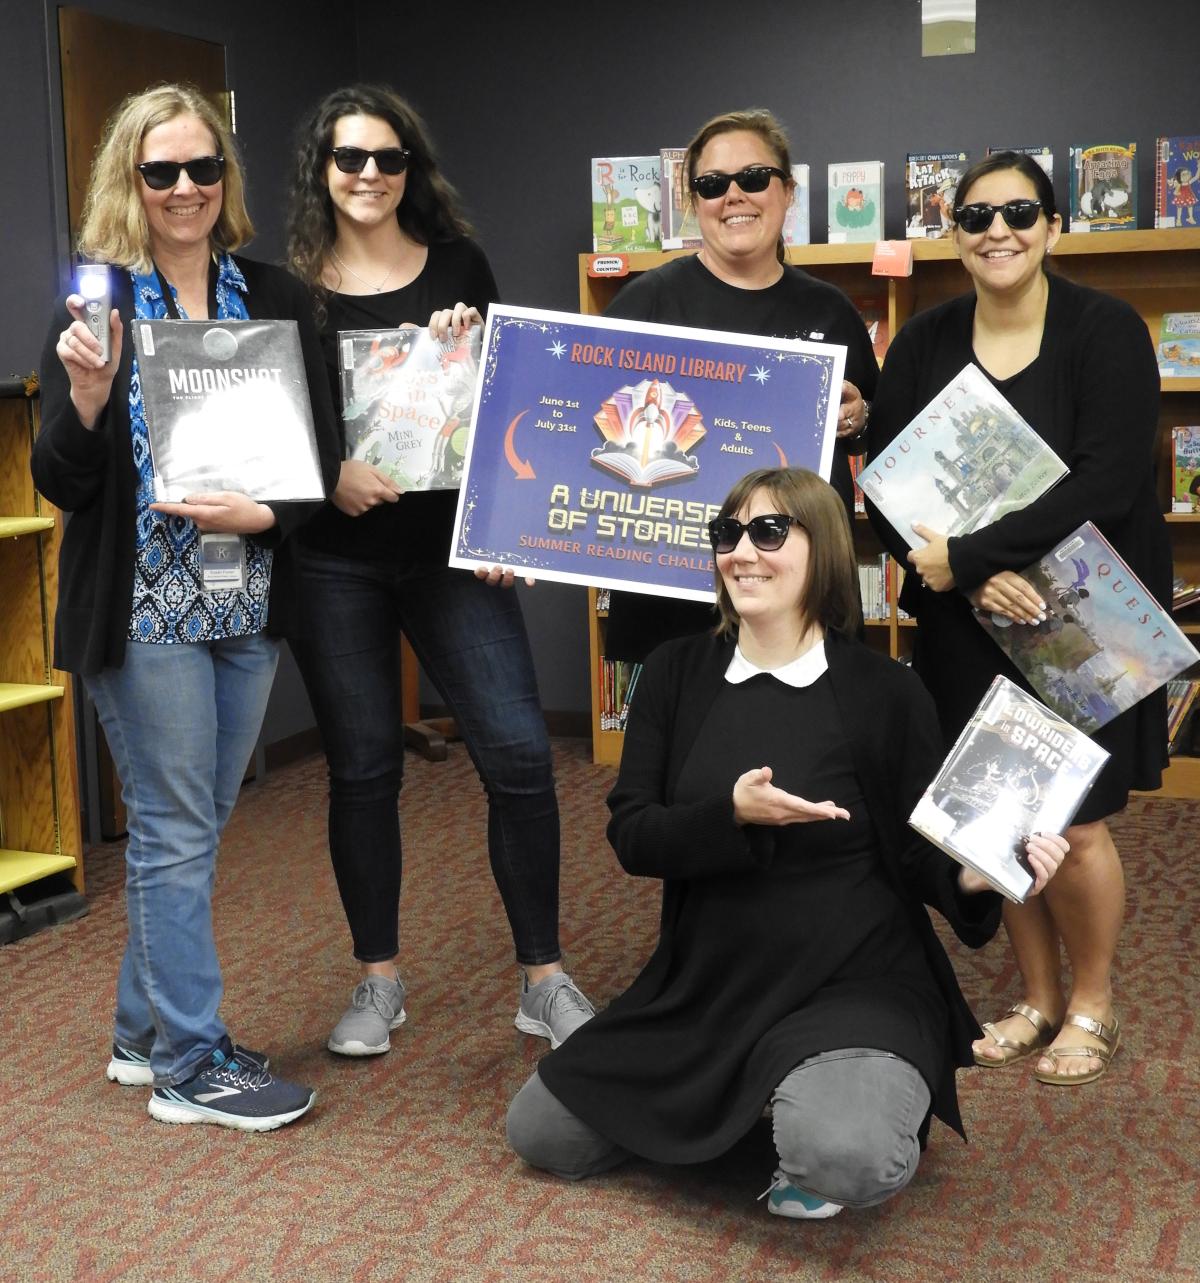 Our L.I.B team (librarians in black) are ready to help you save the universe at our Interactive Movie!